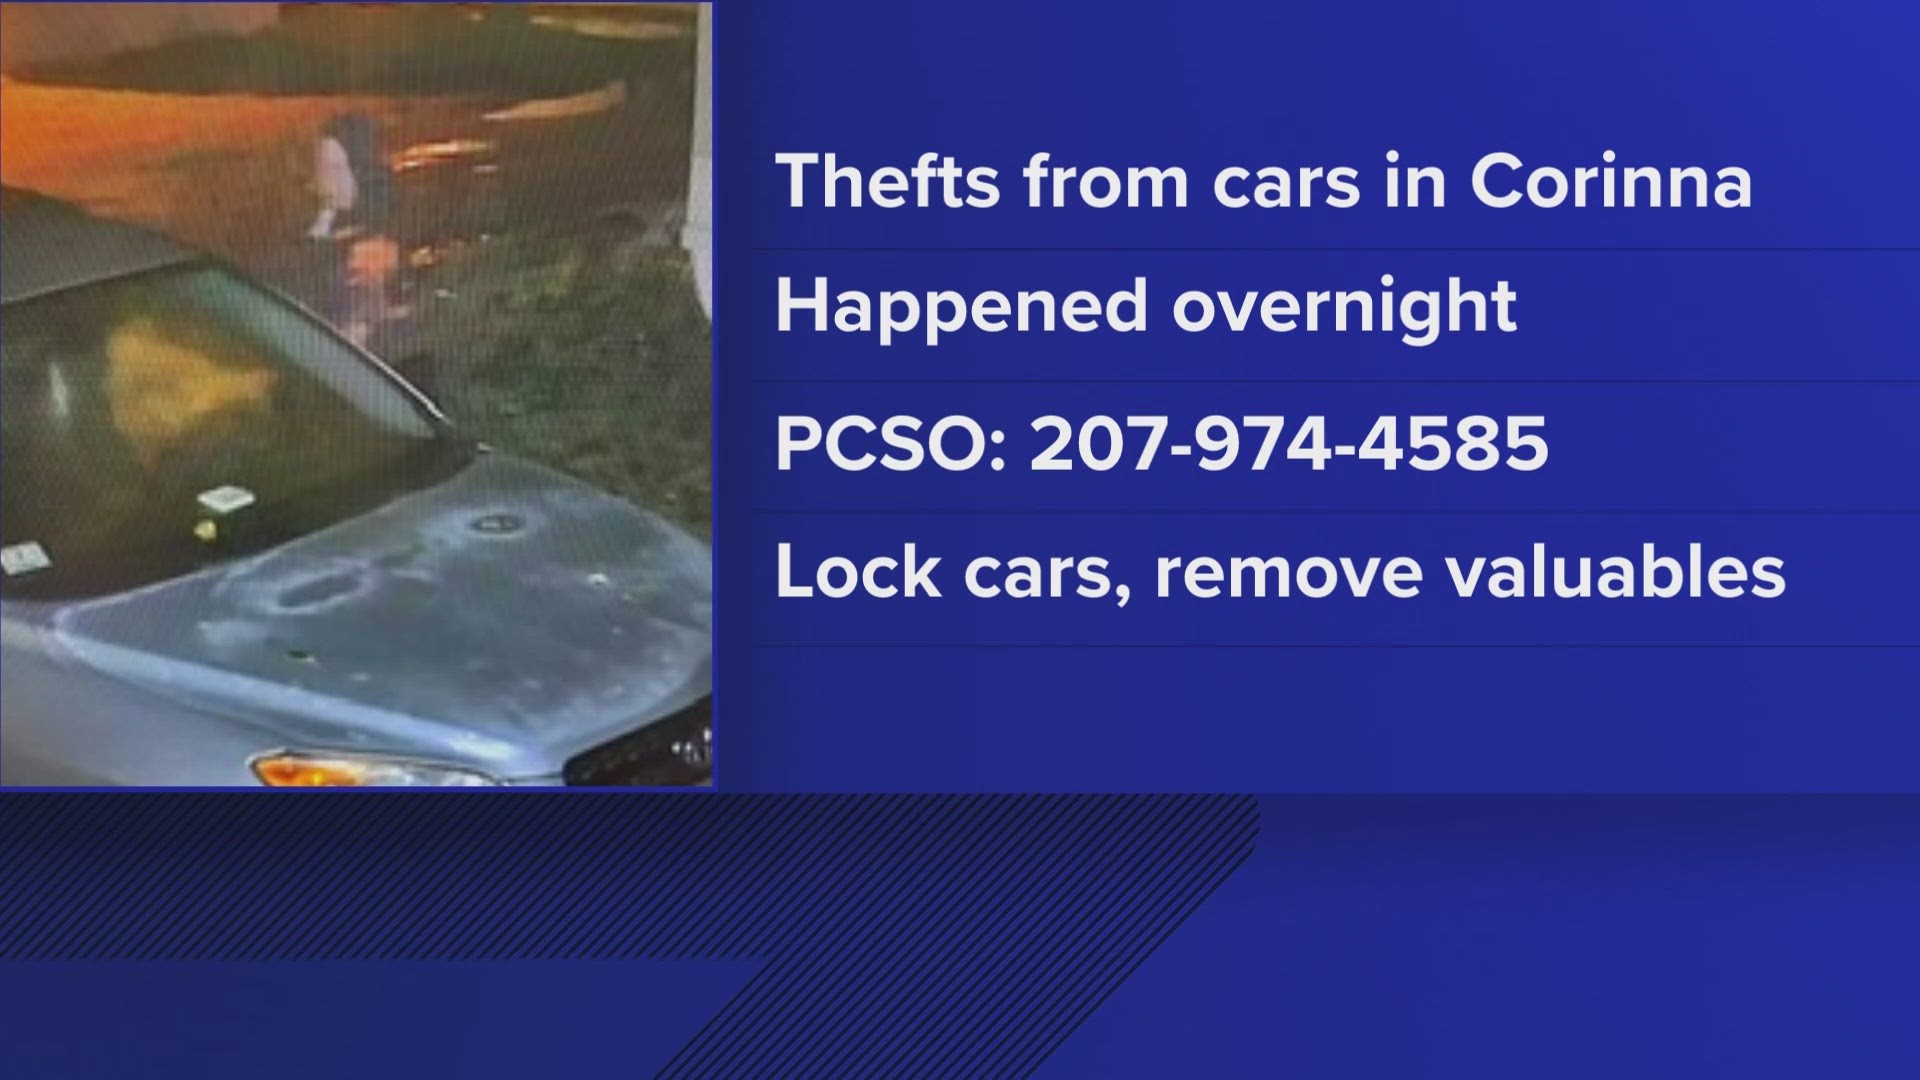 The Penobscot County Sheriff's Office is urging residents to lock their vehicles and remove any valuables, as they investigate these "overnight" crimes.